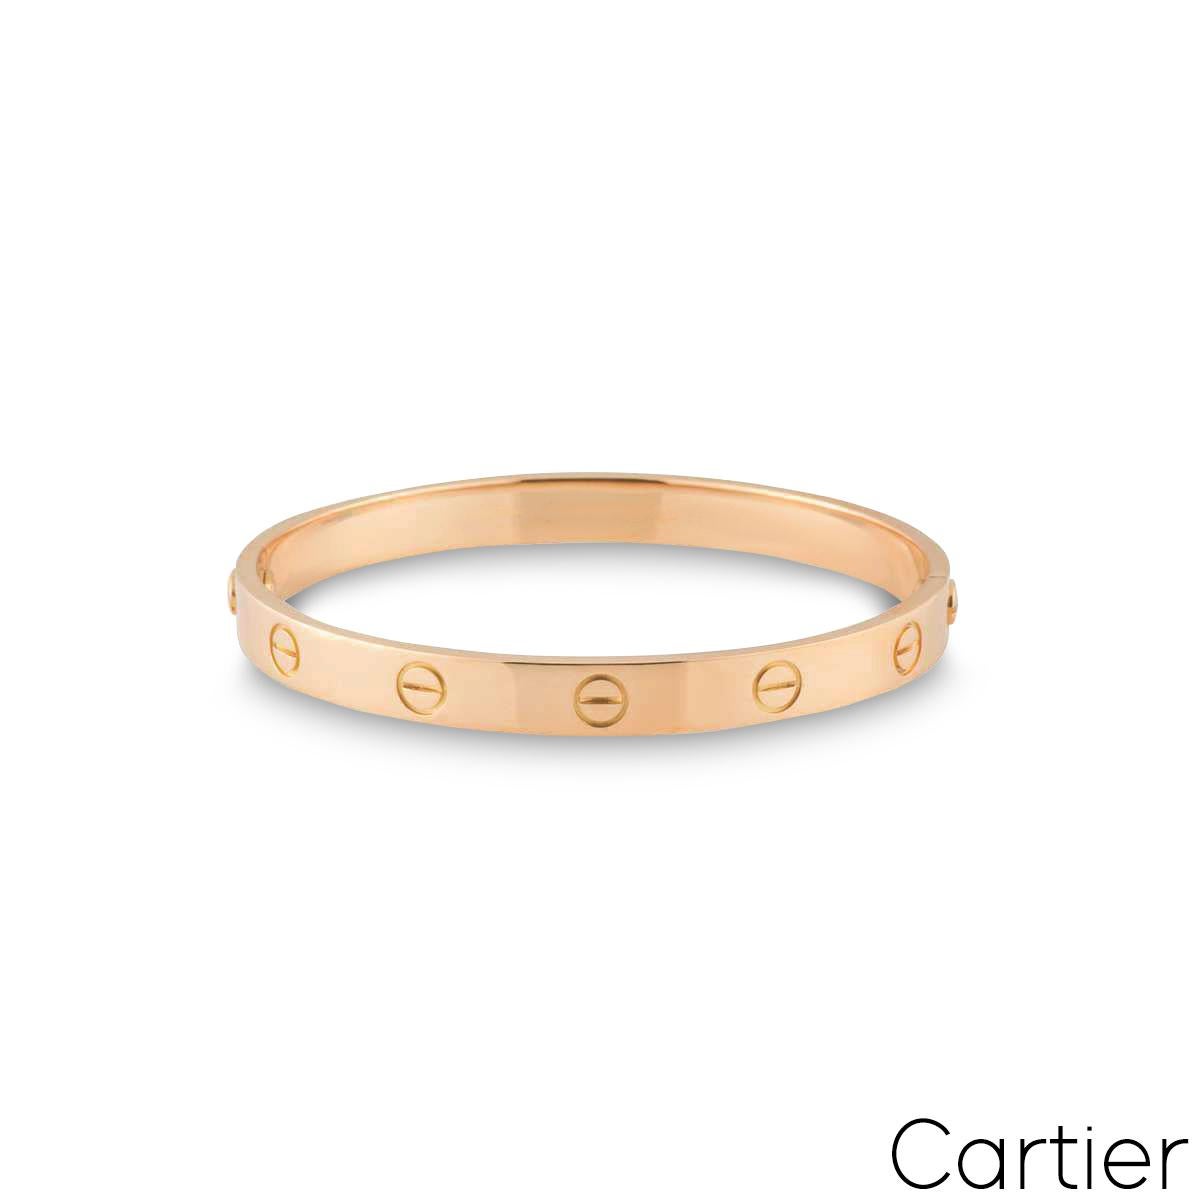 Cartier Rose Gold Plain Love Bracelet Size 16 B6035616 In Excellent Condition For Sale In London, GB